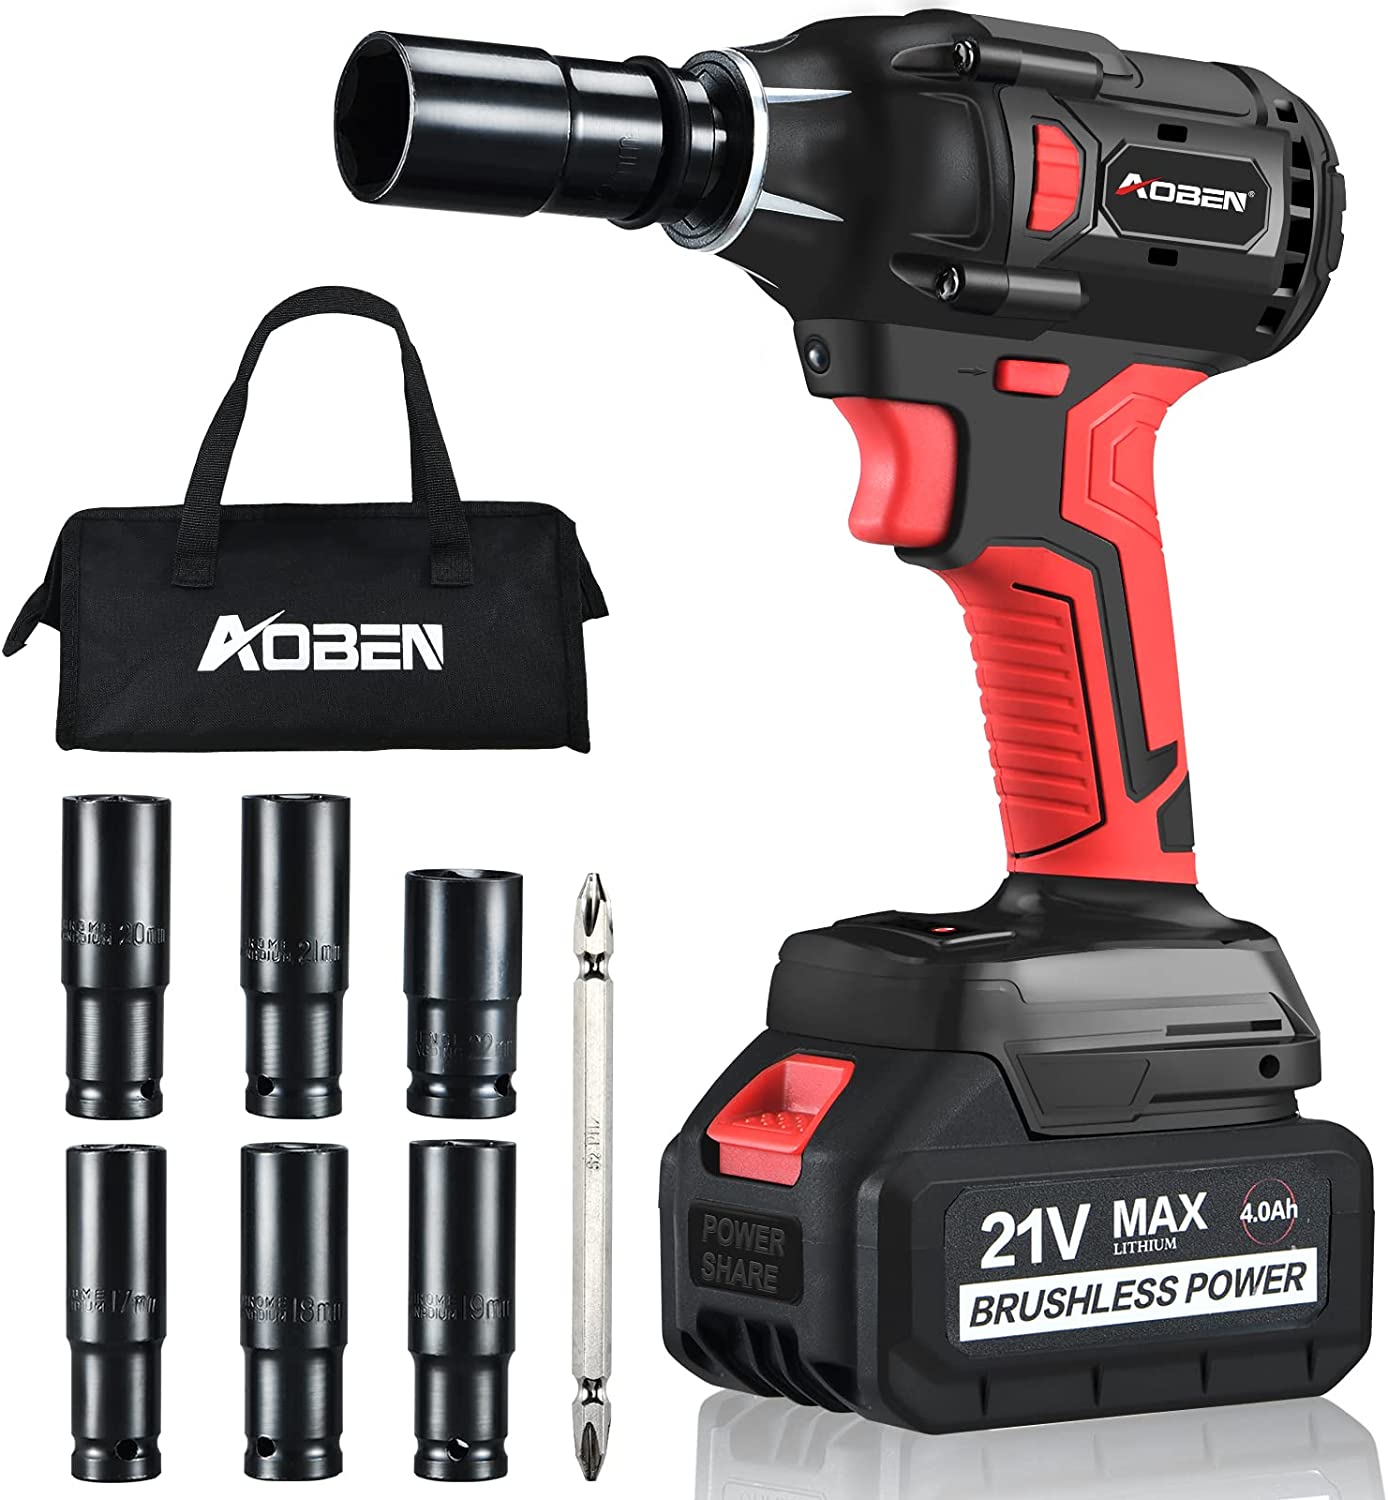 Aoben Impact Wrench Review: The Ultimate Tool for All Your Needs